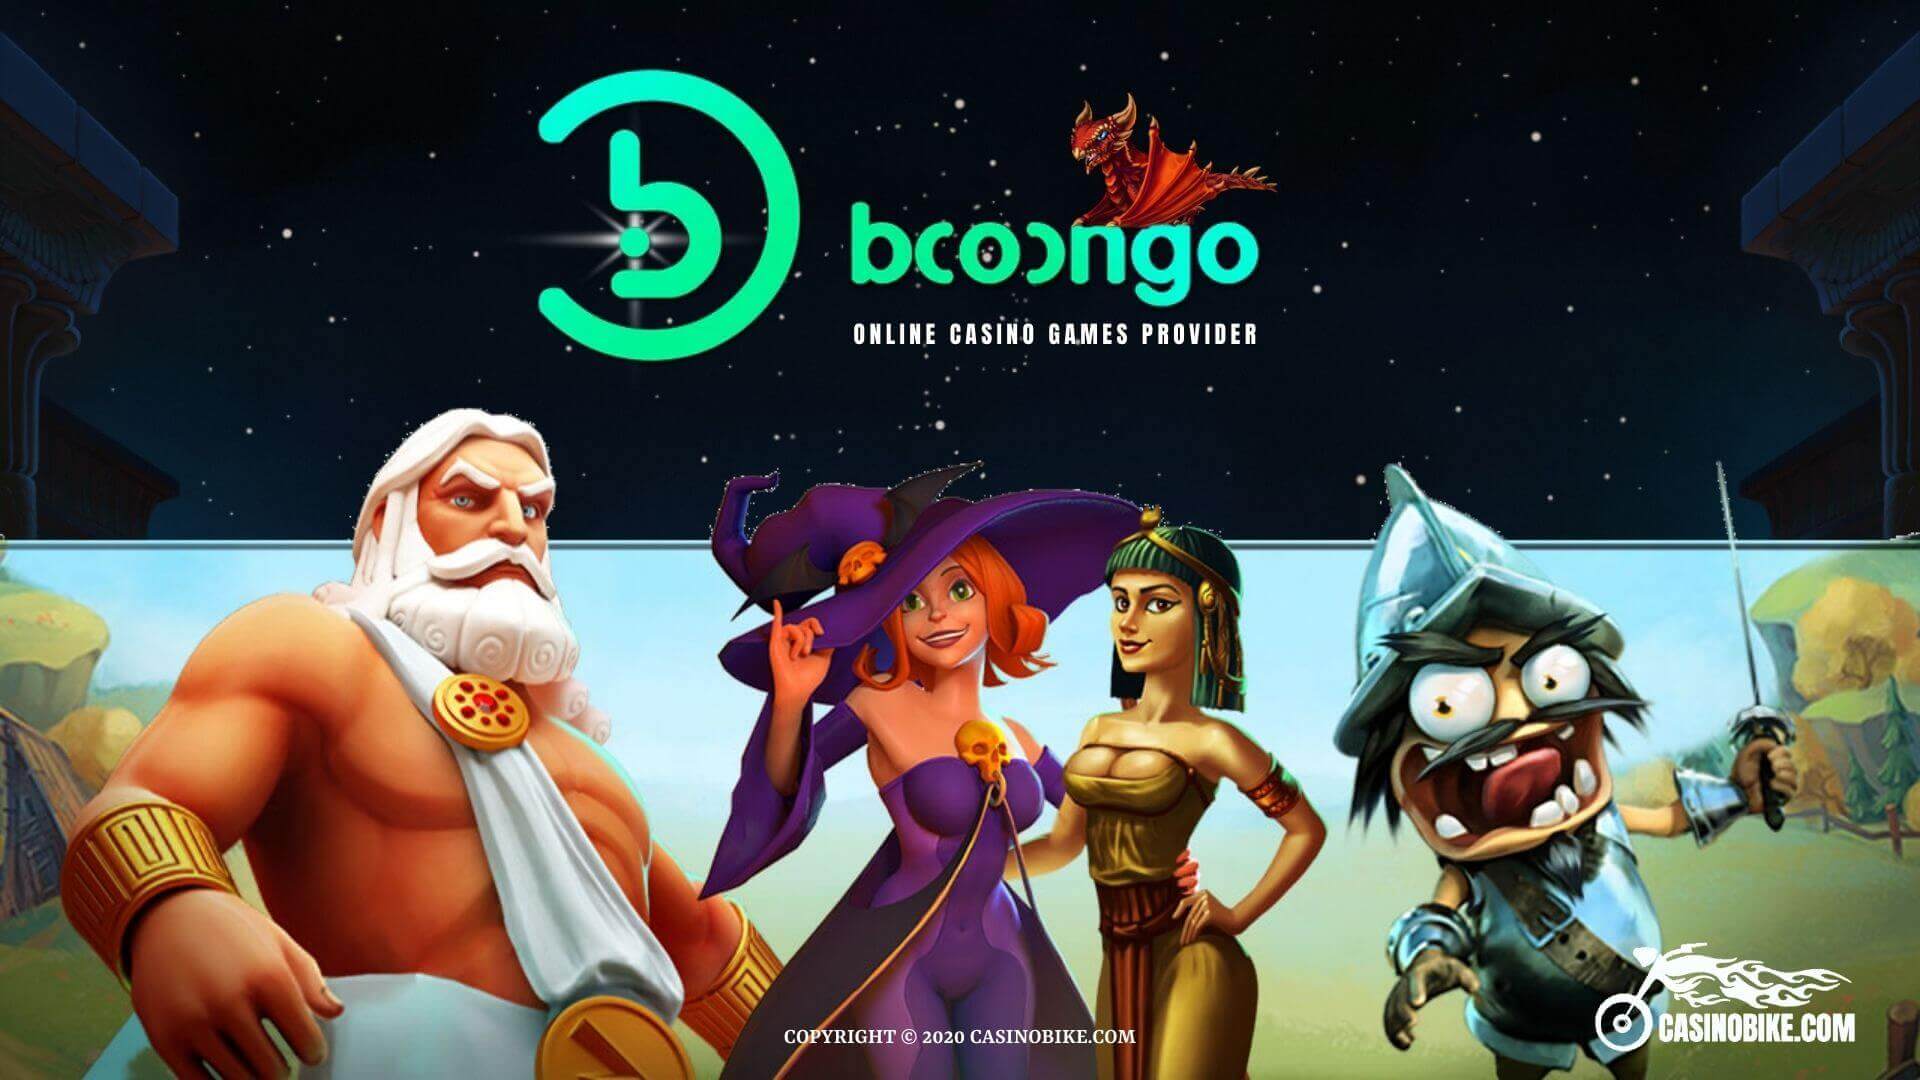 Booongo Gaming Online Slots Game Provider